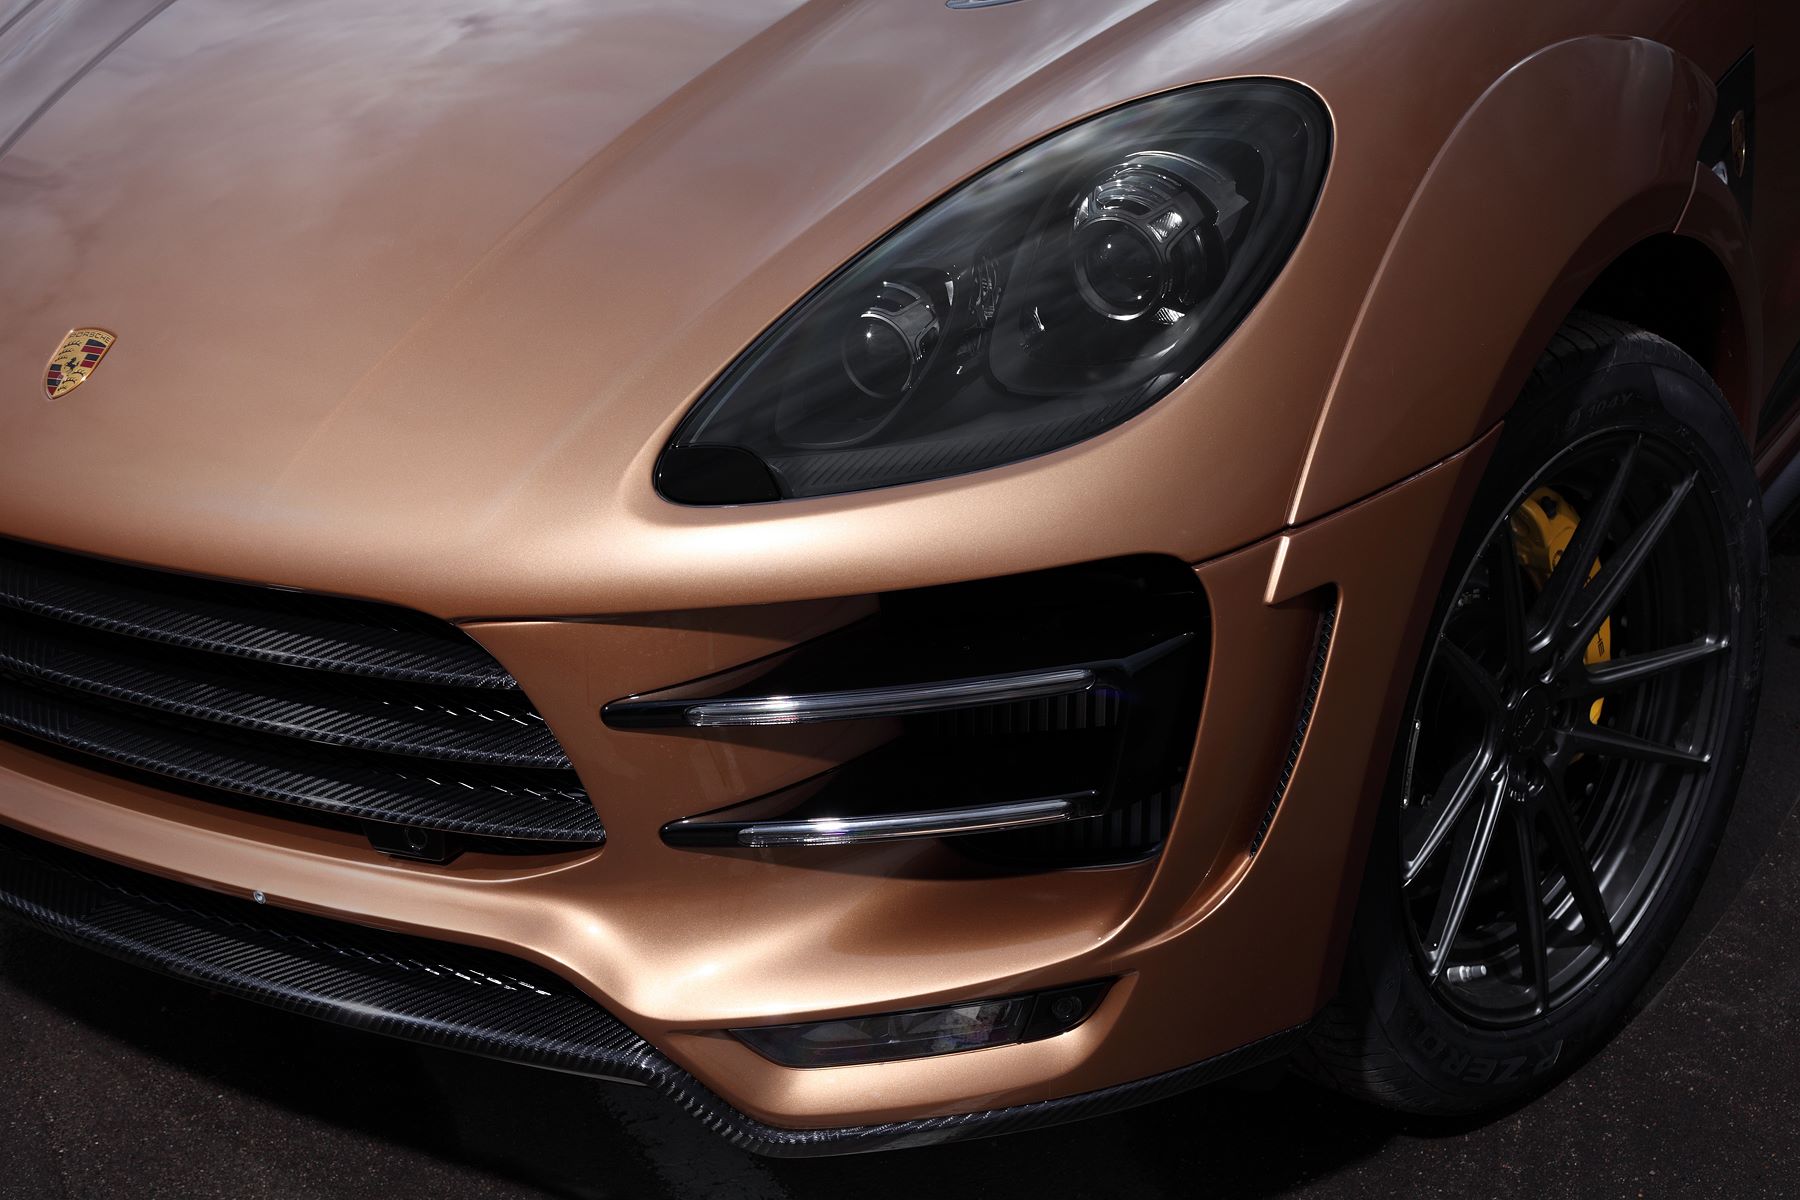 Macan Ursa By Topcar Has Gold Colored Carbon Fiber And Wood